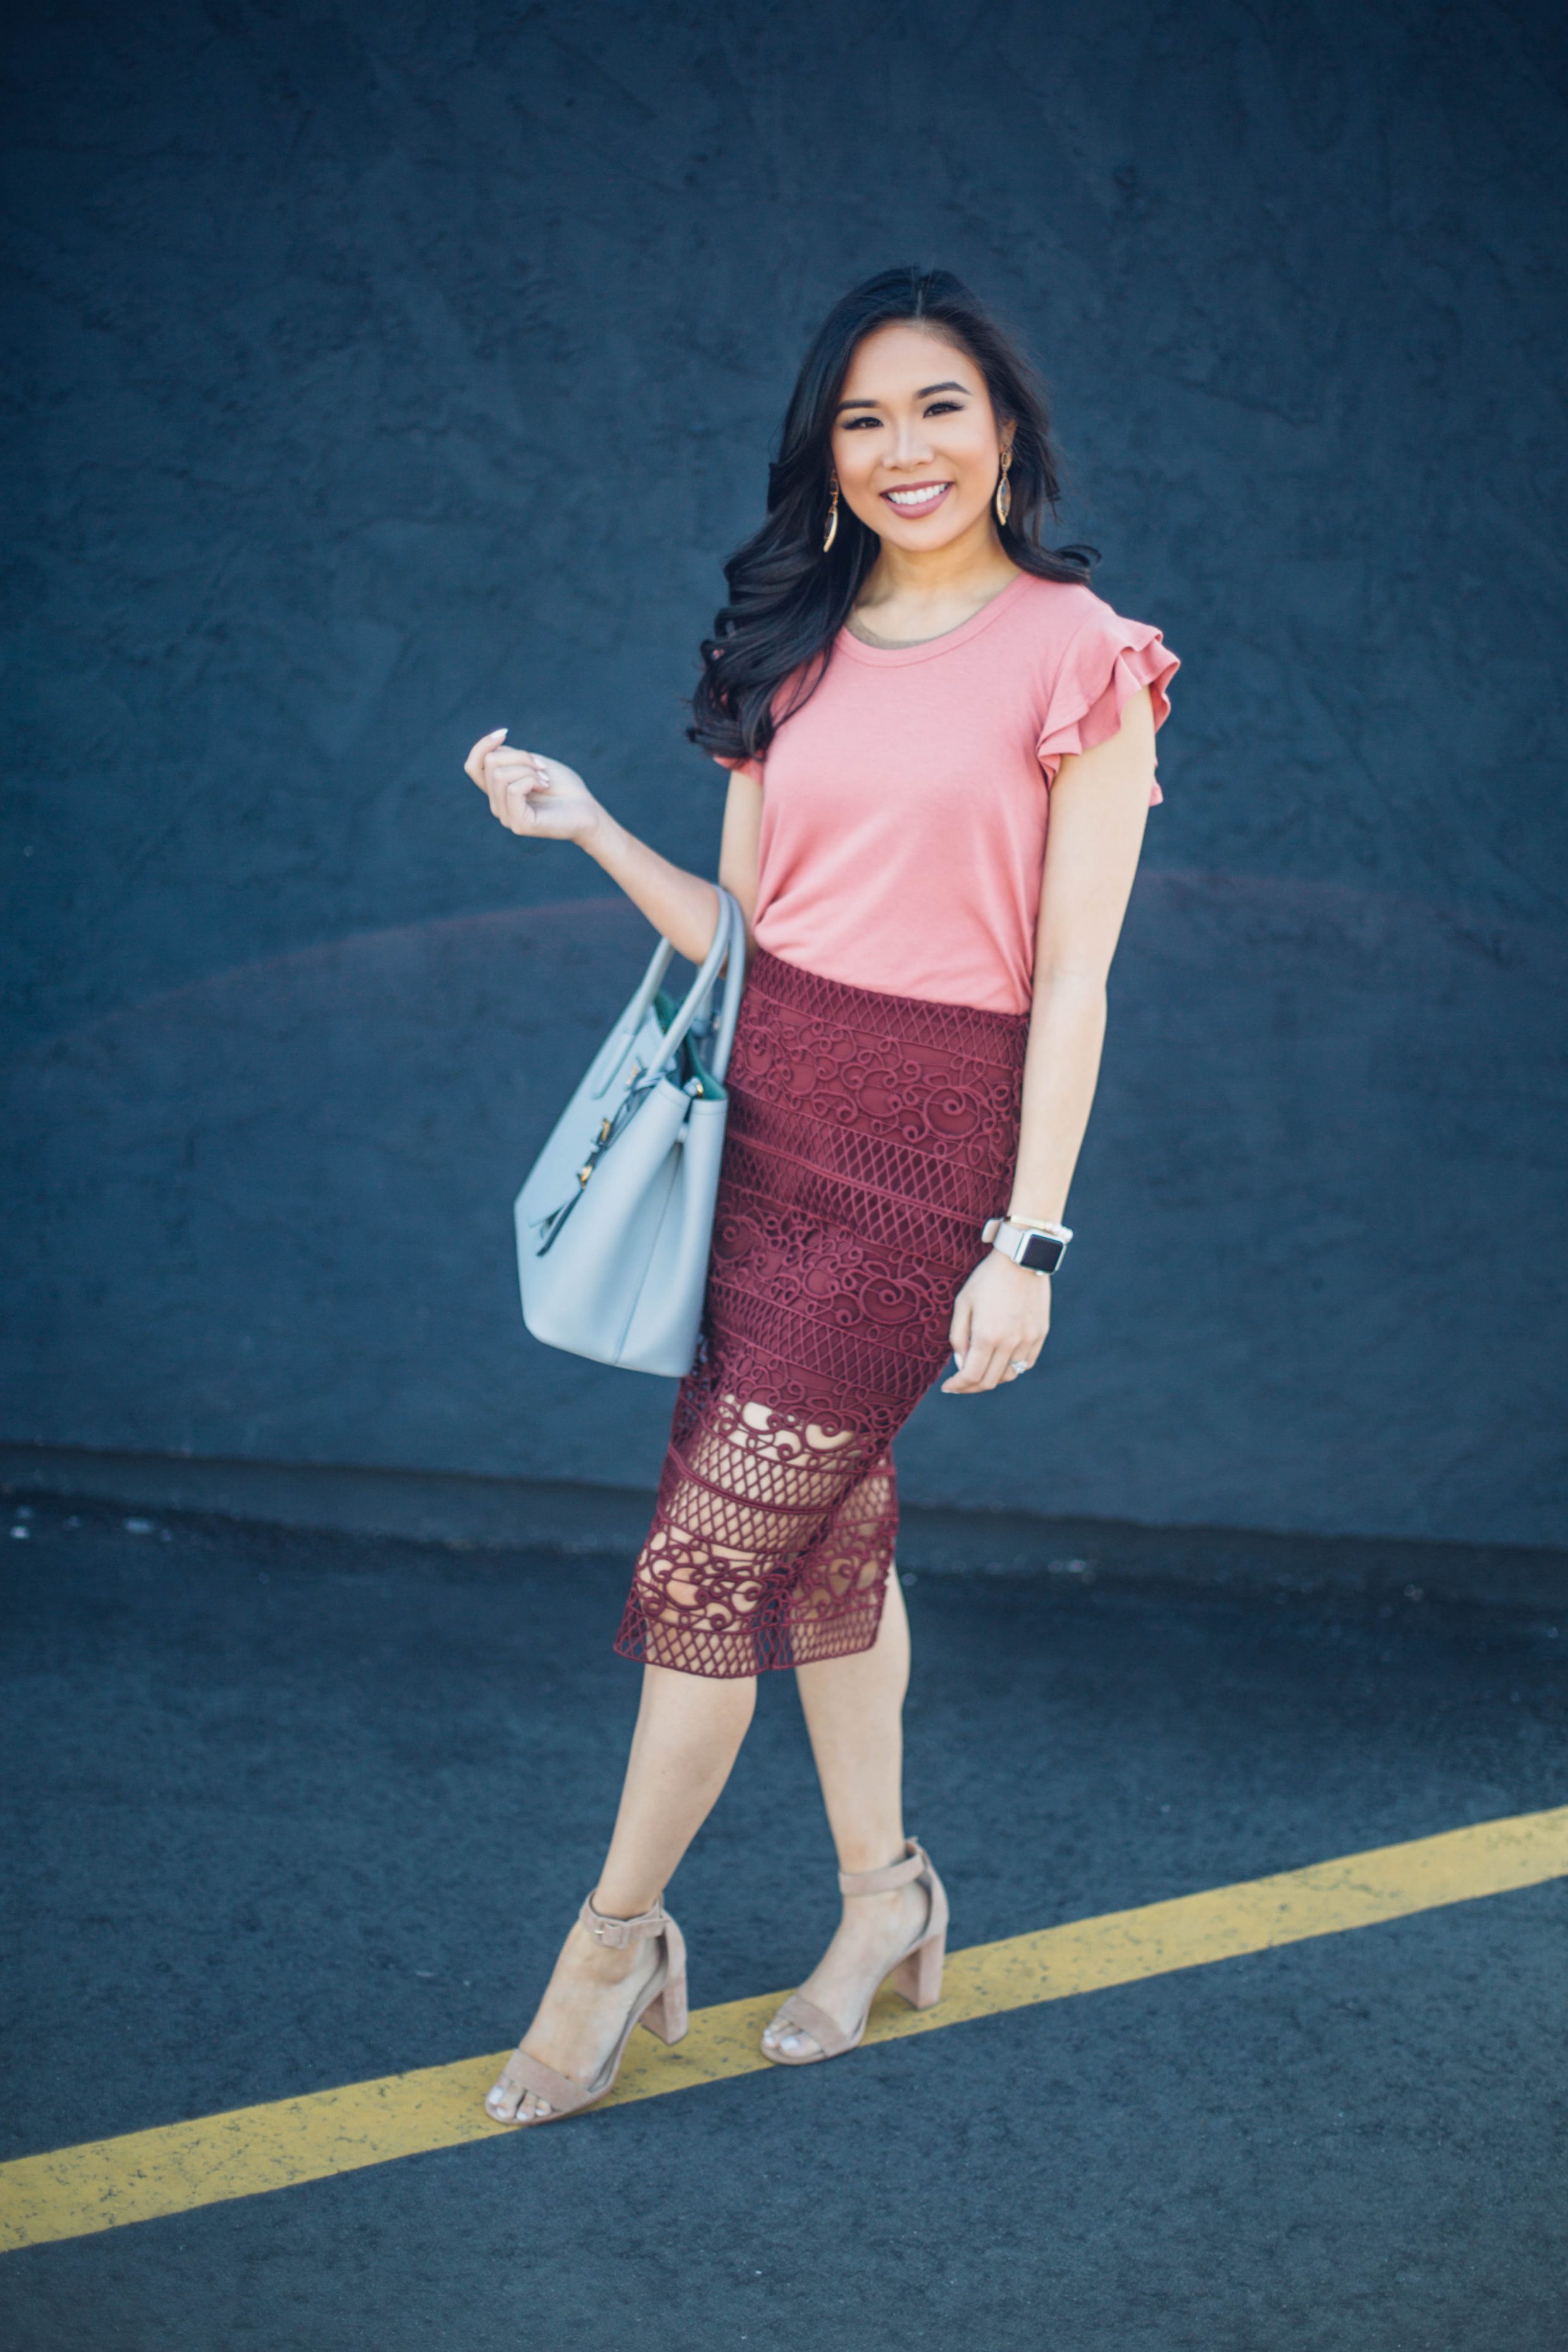 Ruffle tee and crochet skirt for a spring work outfit